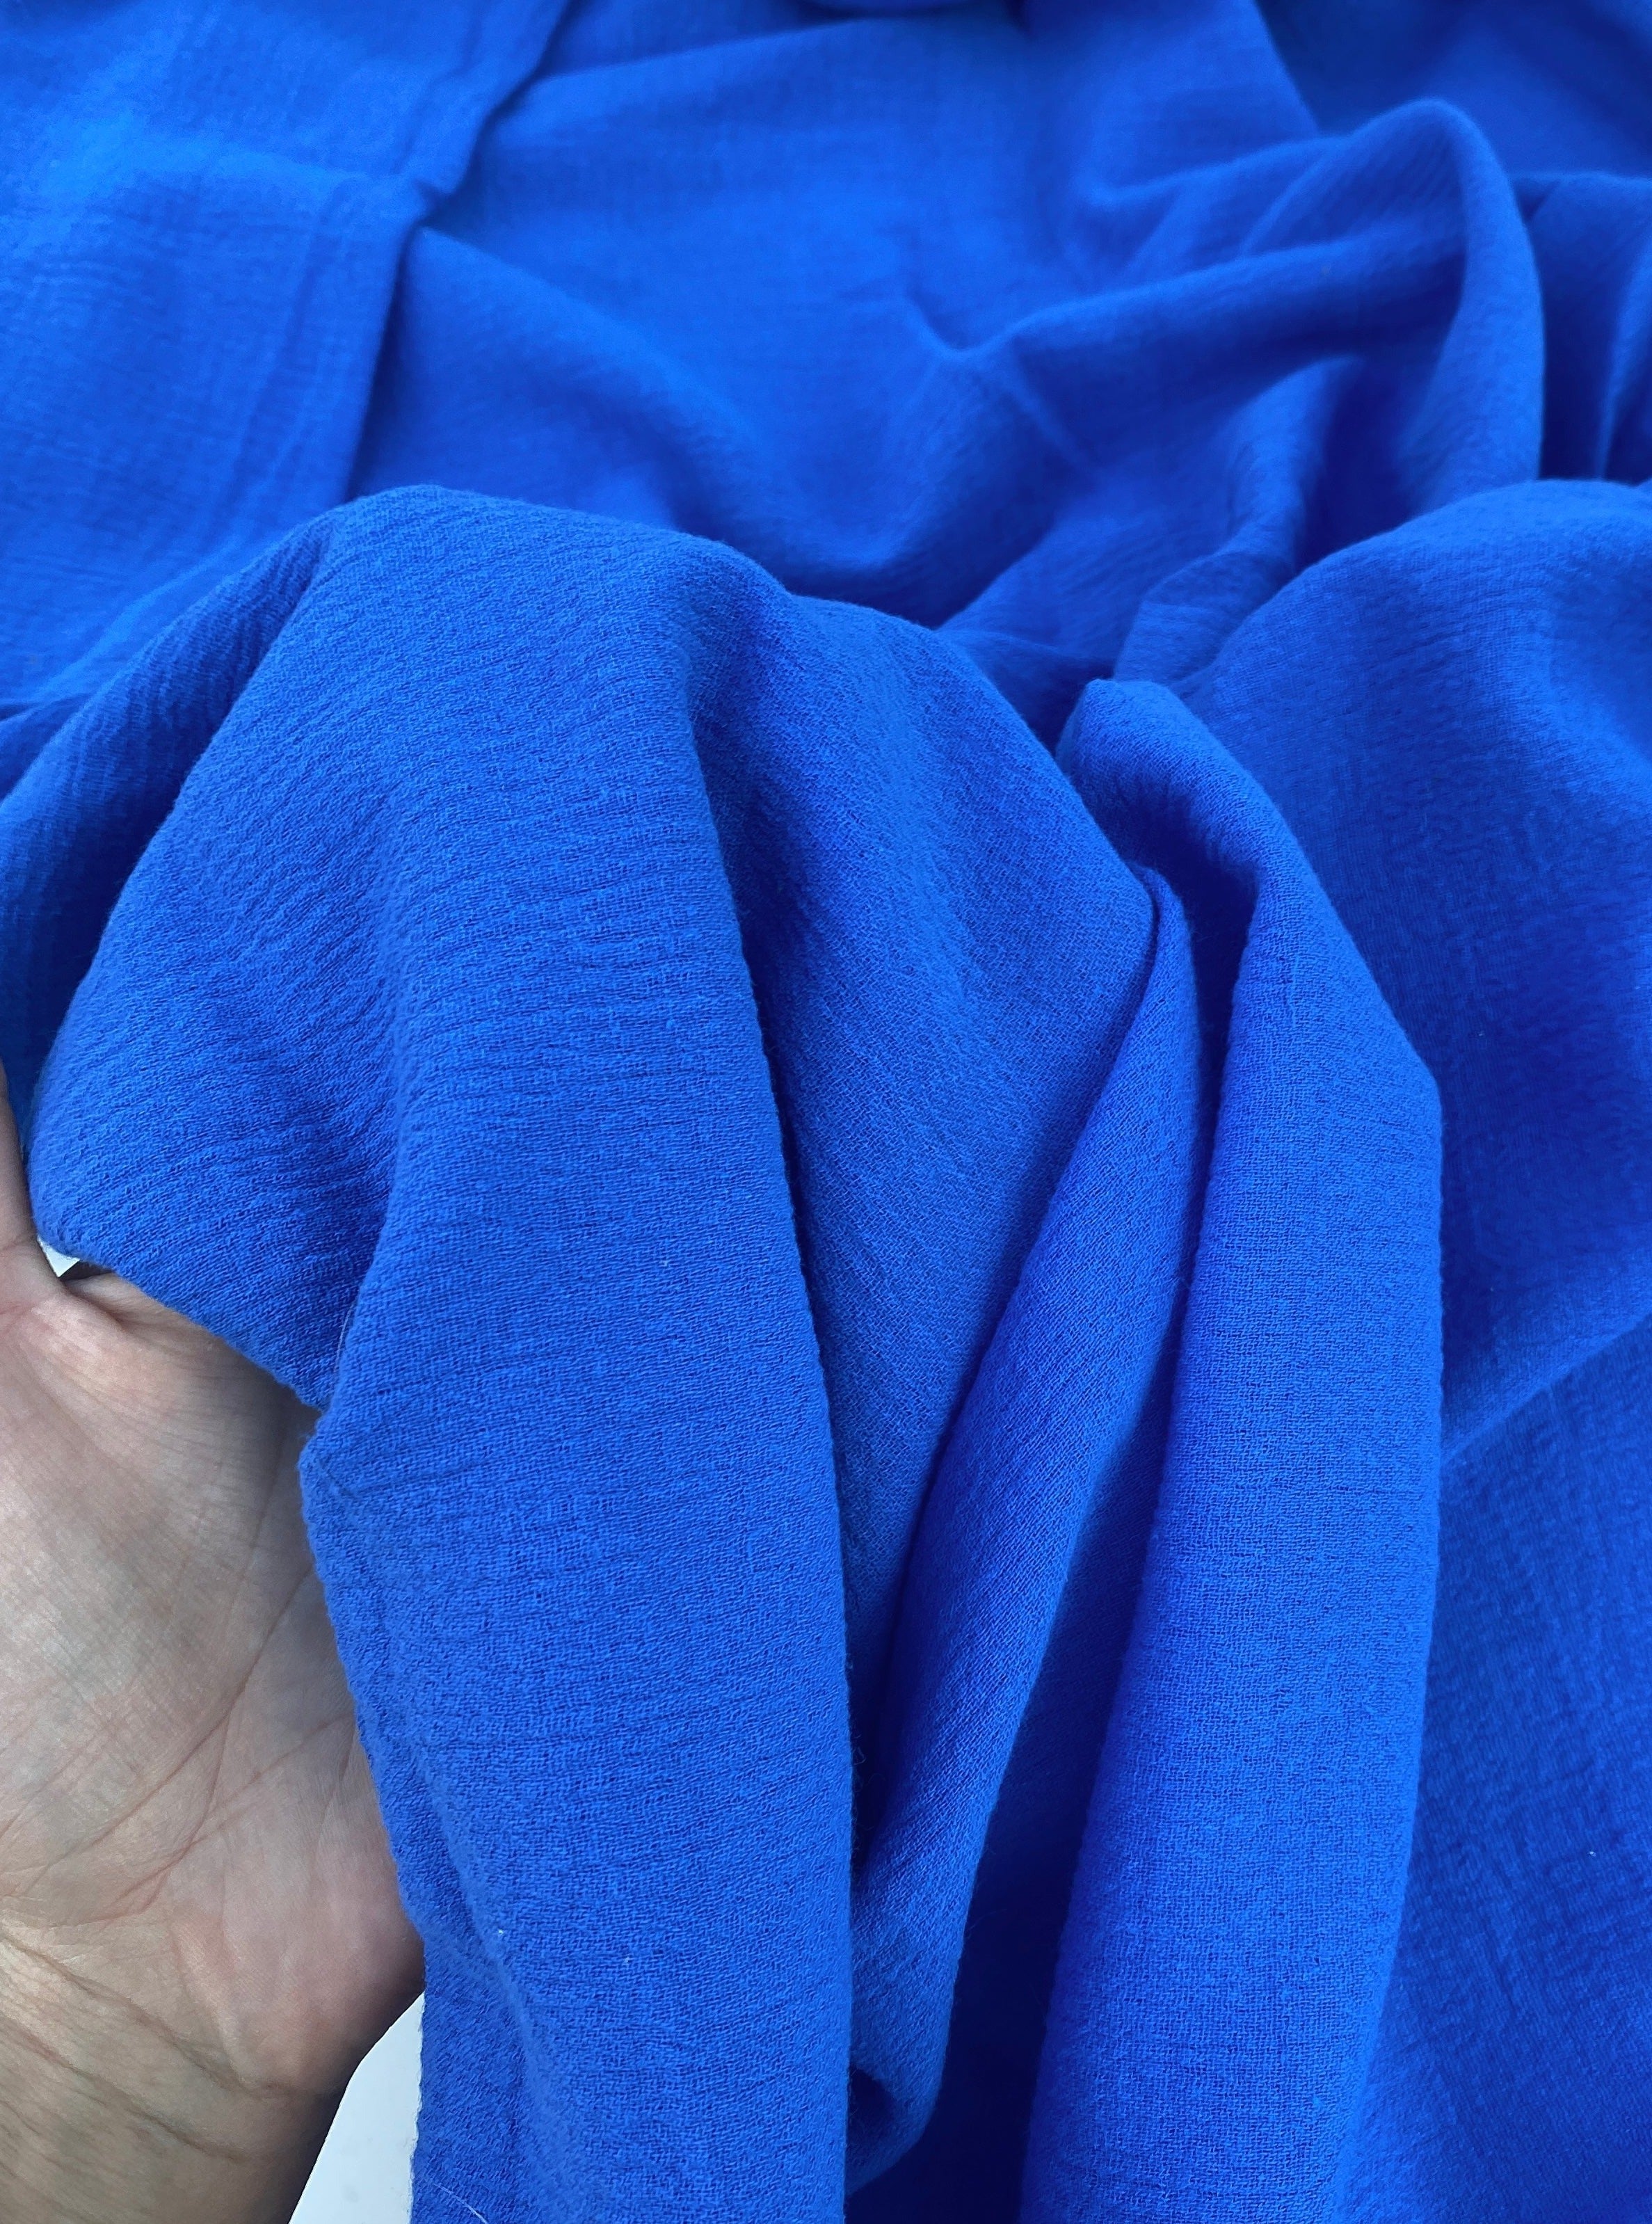 45 Royal Blue Muslin Fabric Per Yard - 100% Cotton [ROYALBLUE-MUSLIN-45] -  $3.99 : , Burlap for Wedding and Special Events